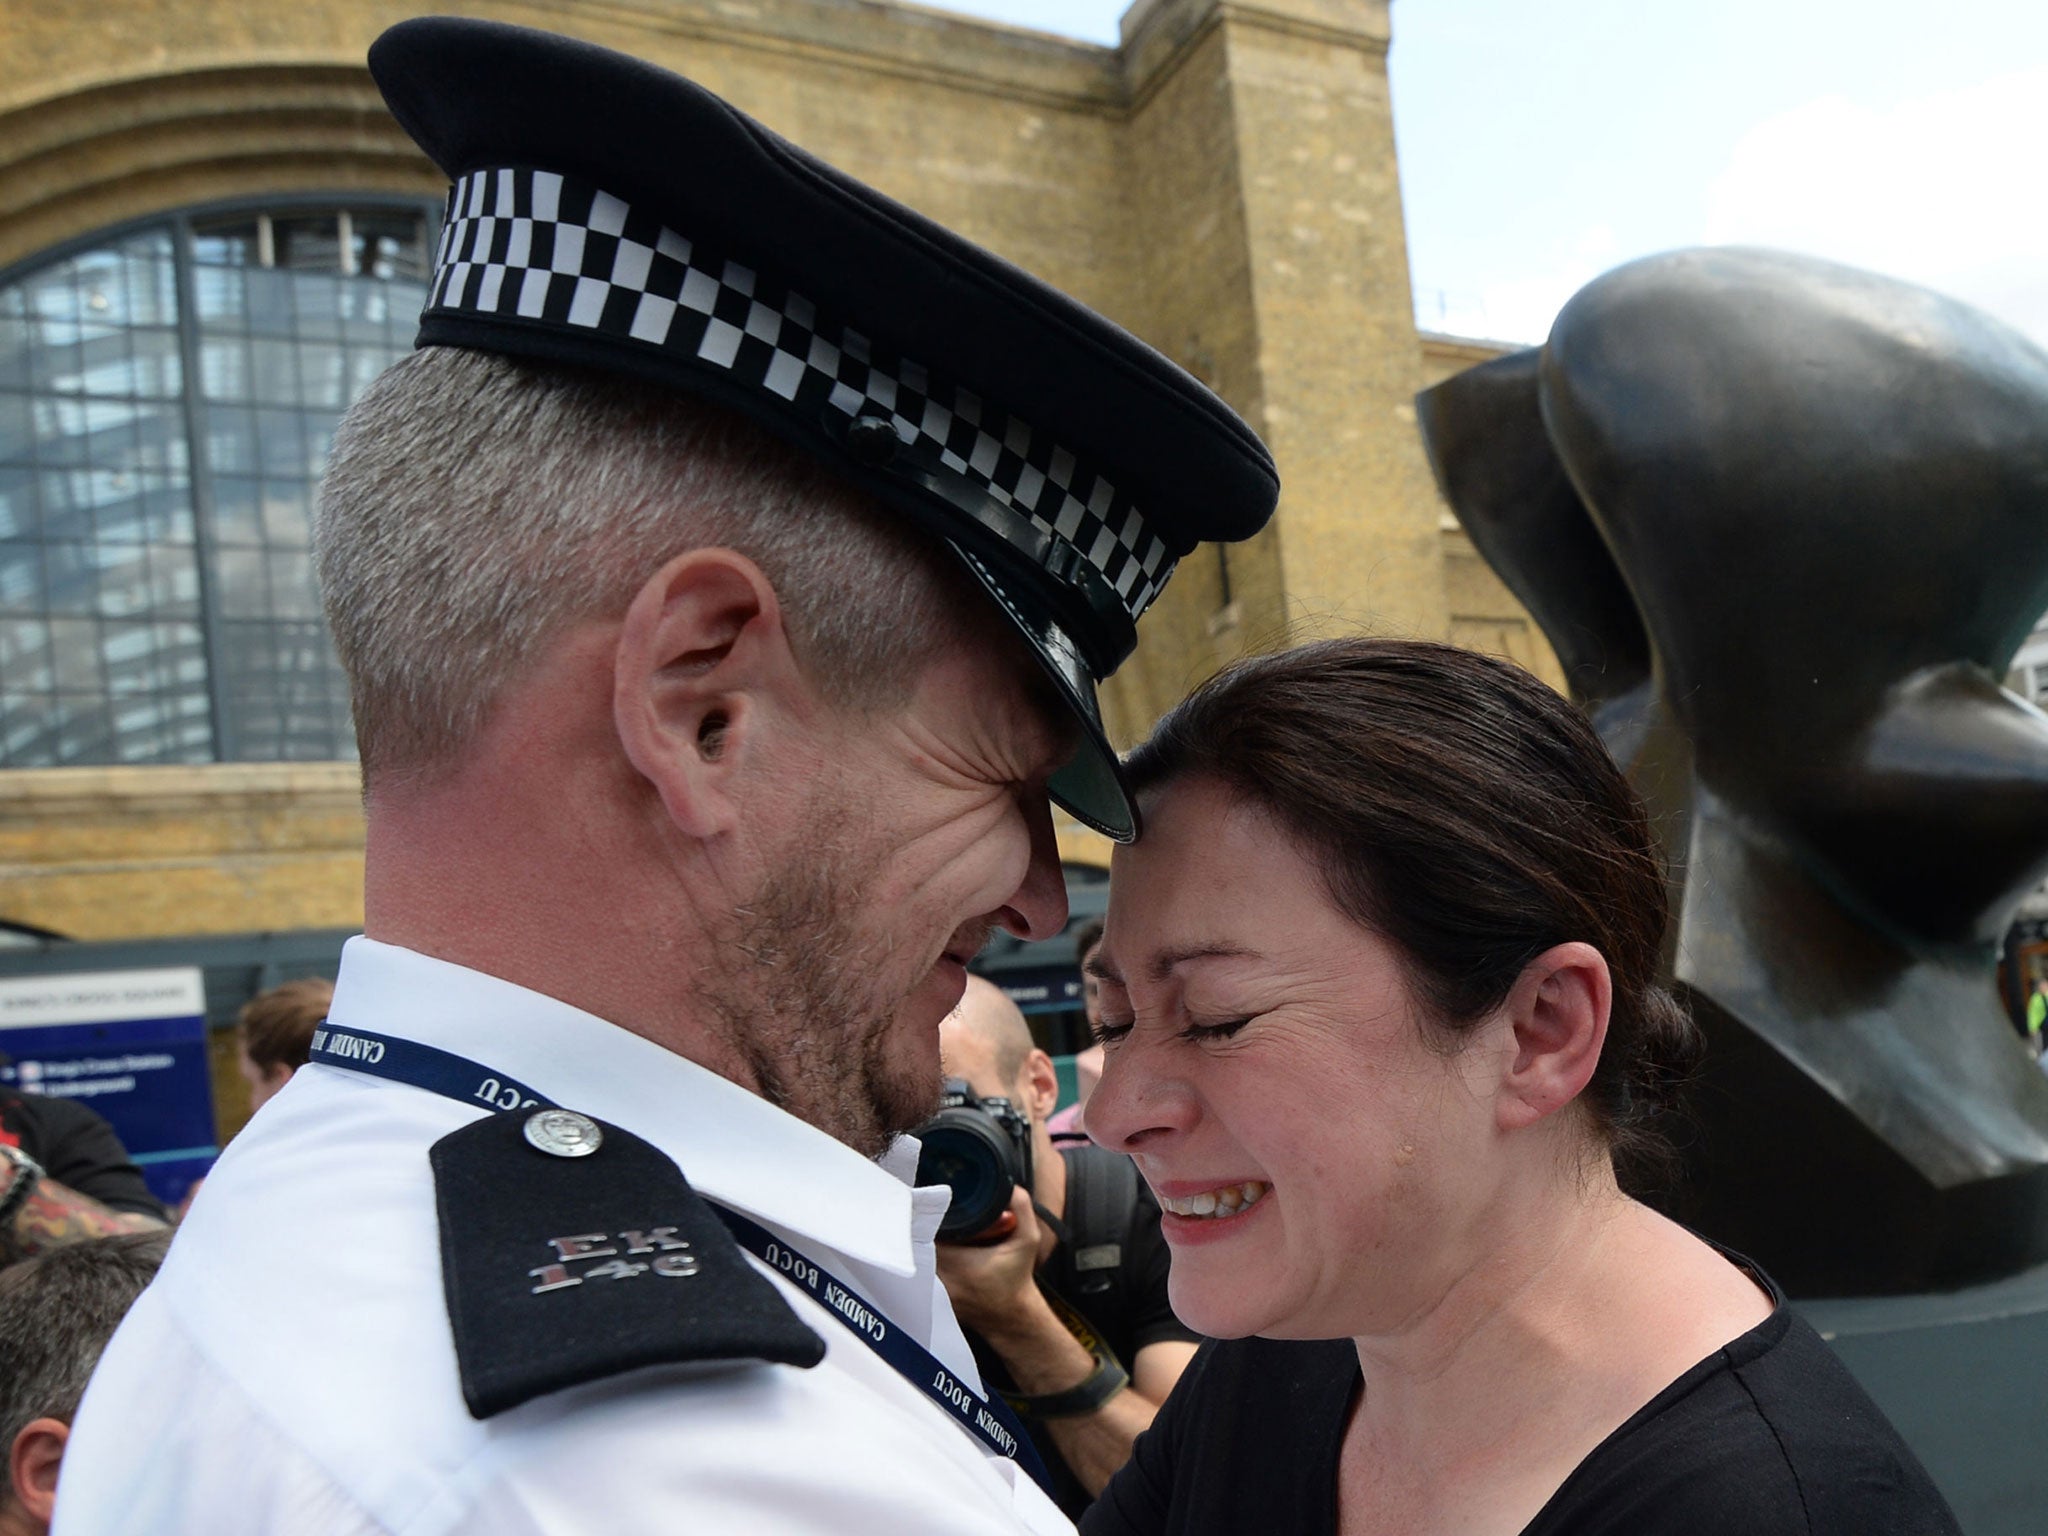 PC Andrew Maxwell was part of a team of officers who went into the tube to bring out survivors